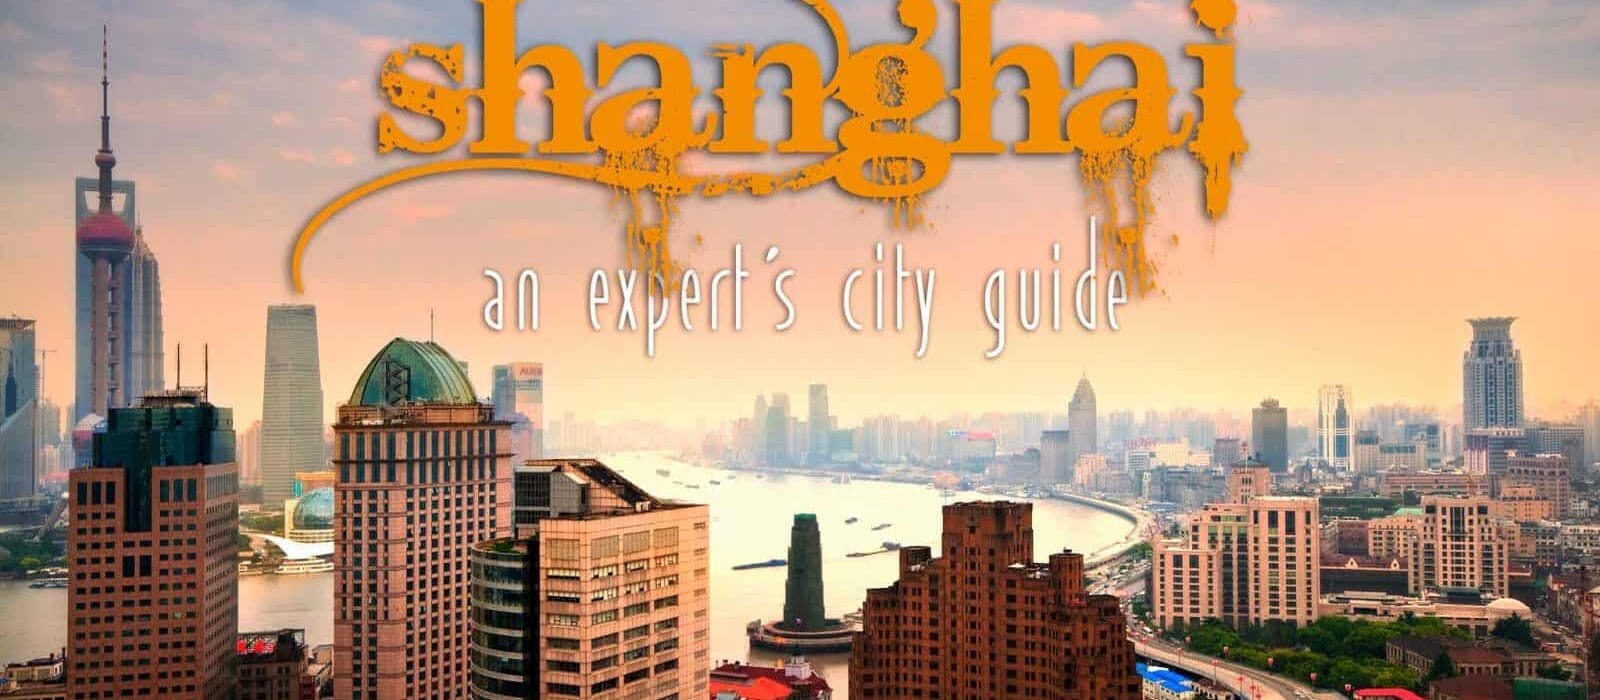 Things to Do in Shanghai, China: An Expert’s City Guide